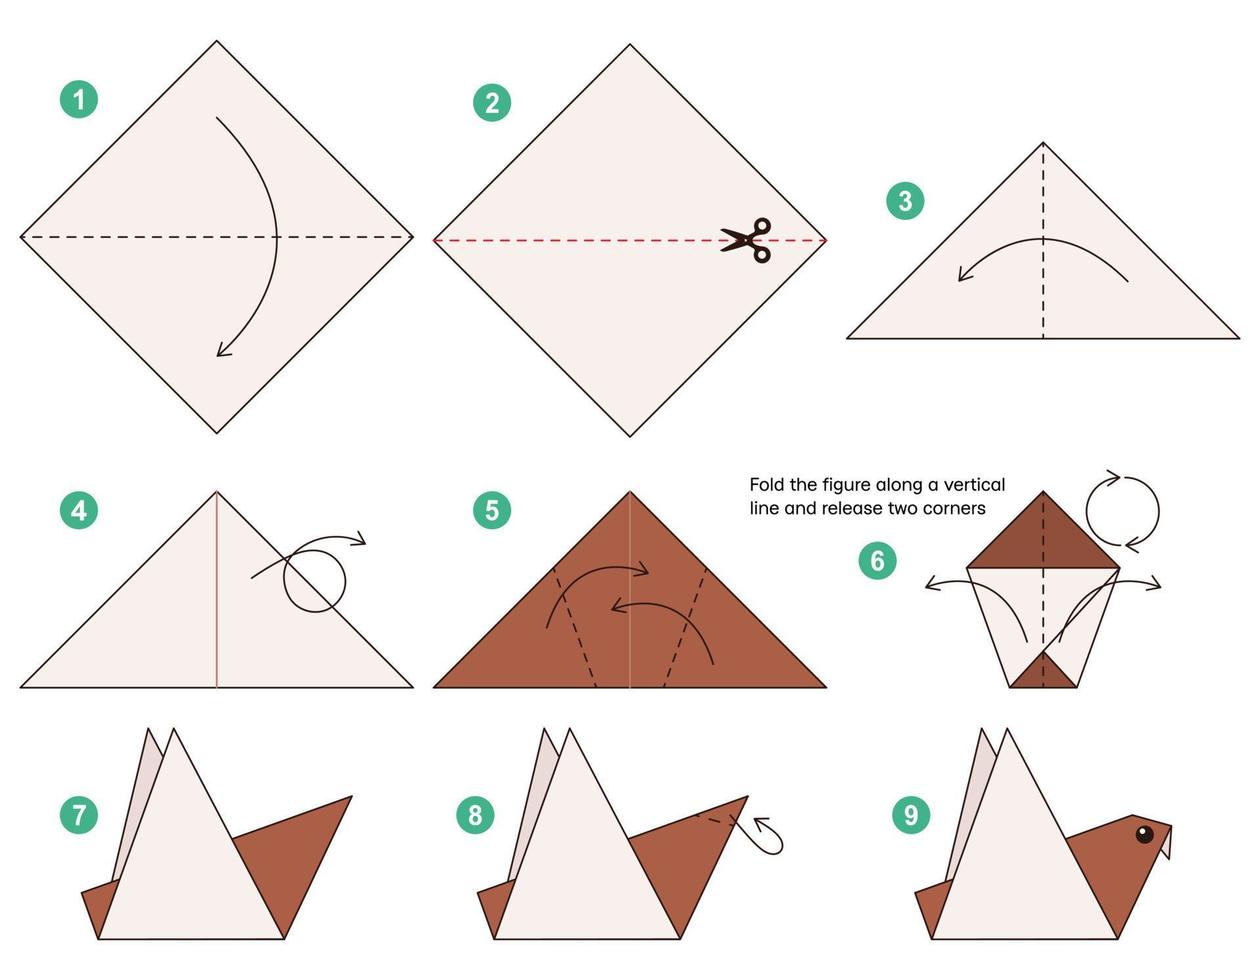 Sparrow origami scheme tutorial moving model. Origami for kids. Step by step how to make a cute origami sparrow. Vector illustration.